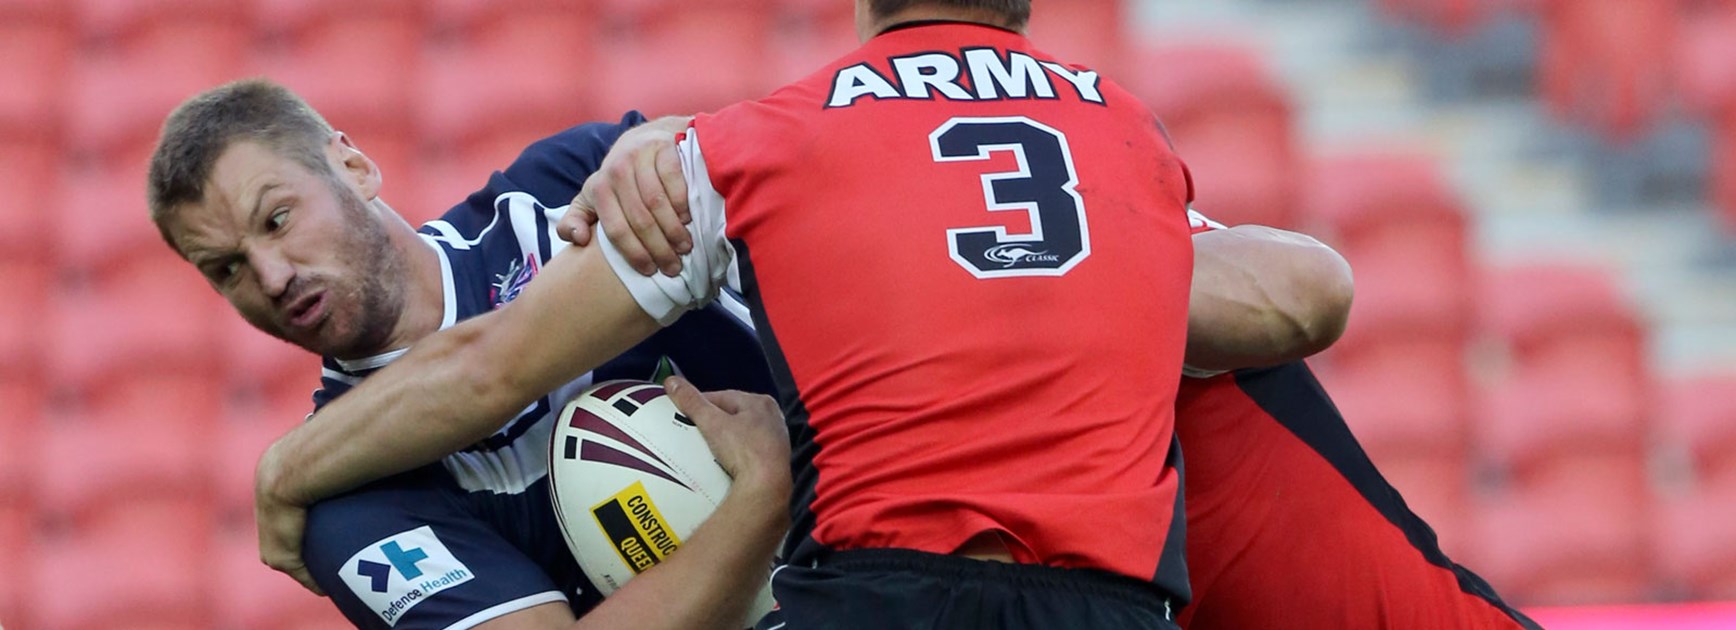 Rob Worsley playing for the Air Force against the Army in a State of Origin curtain-raiser last year.